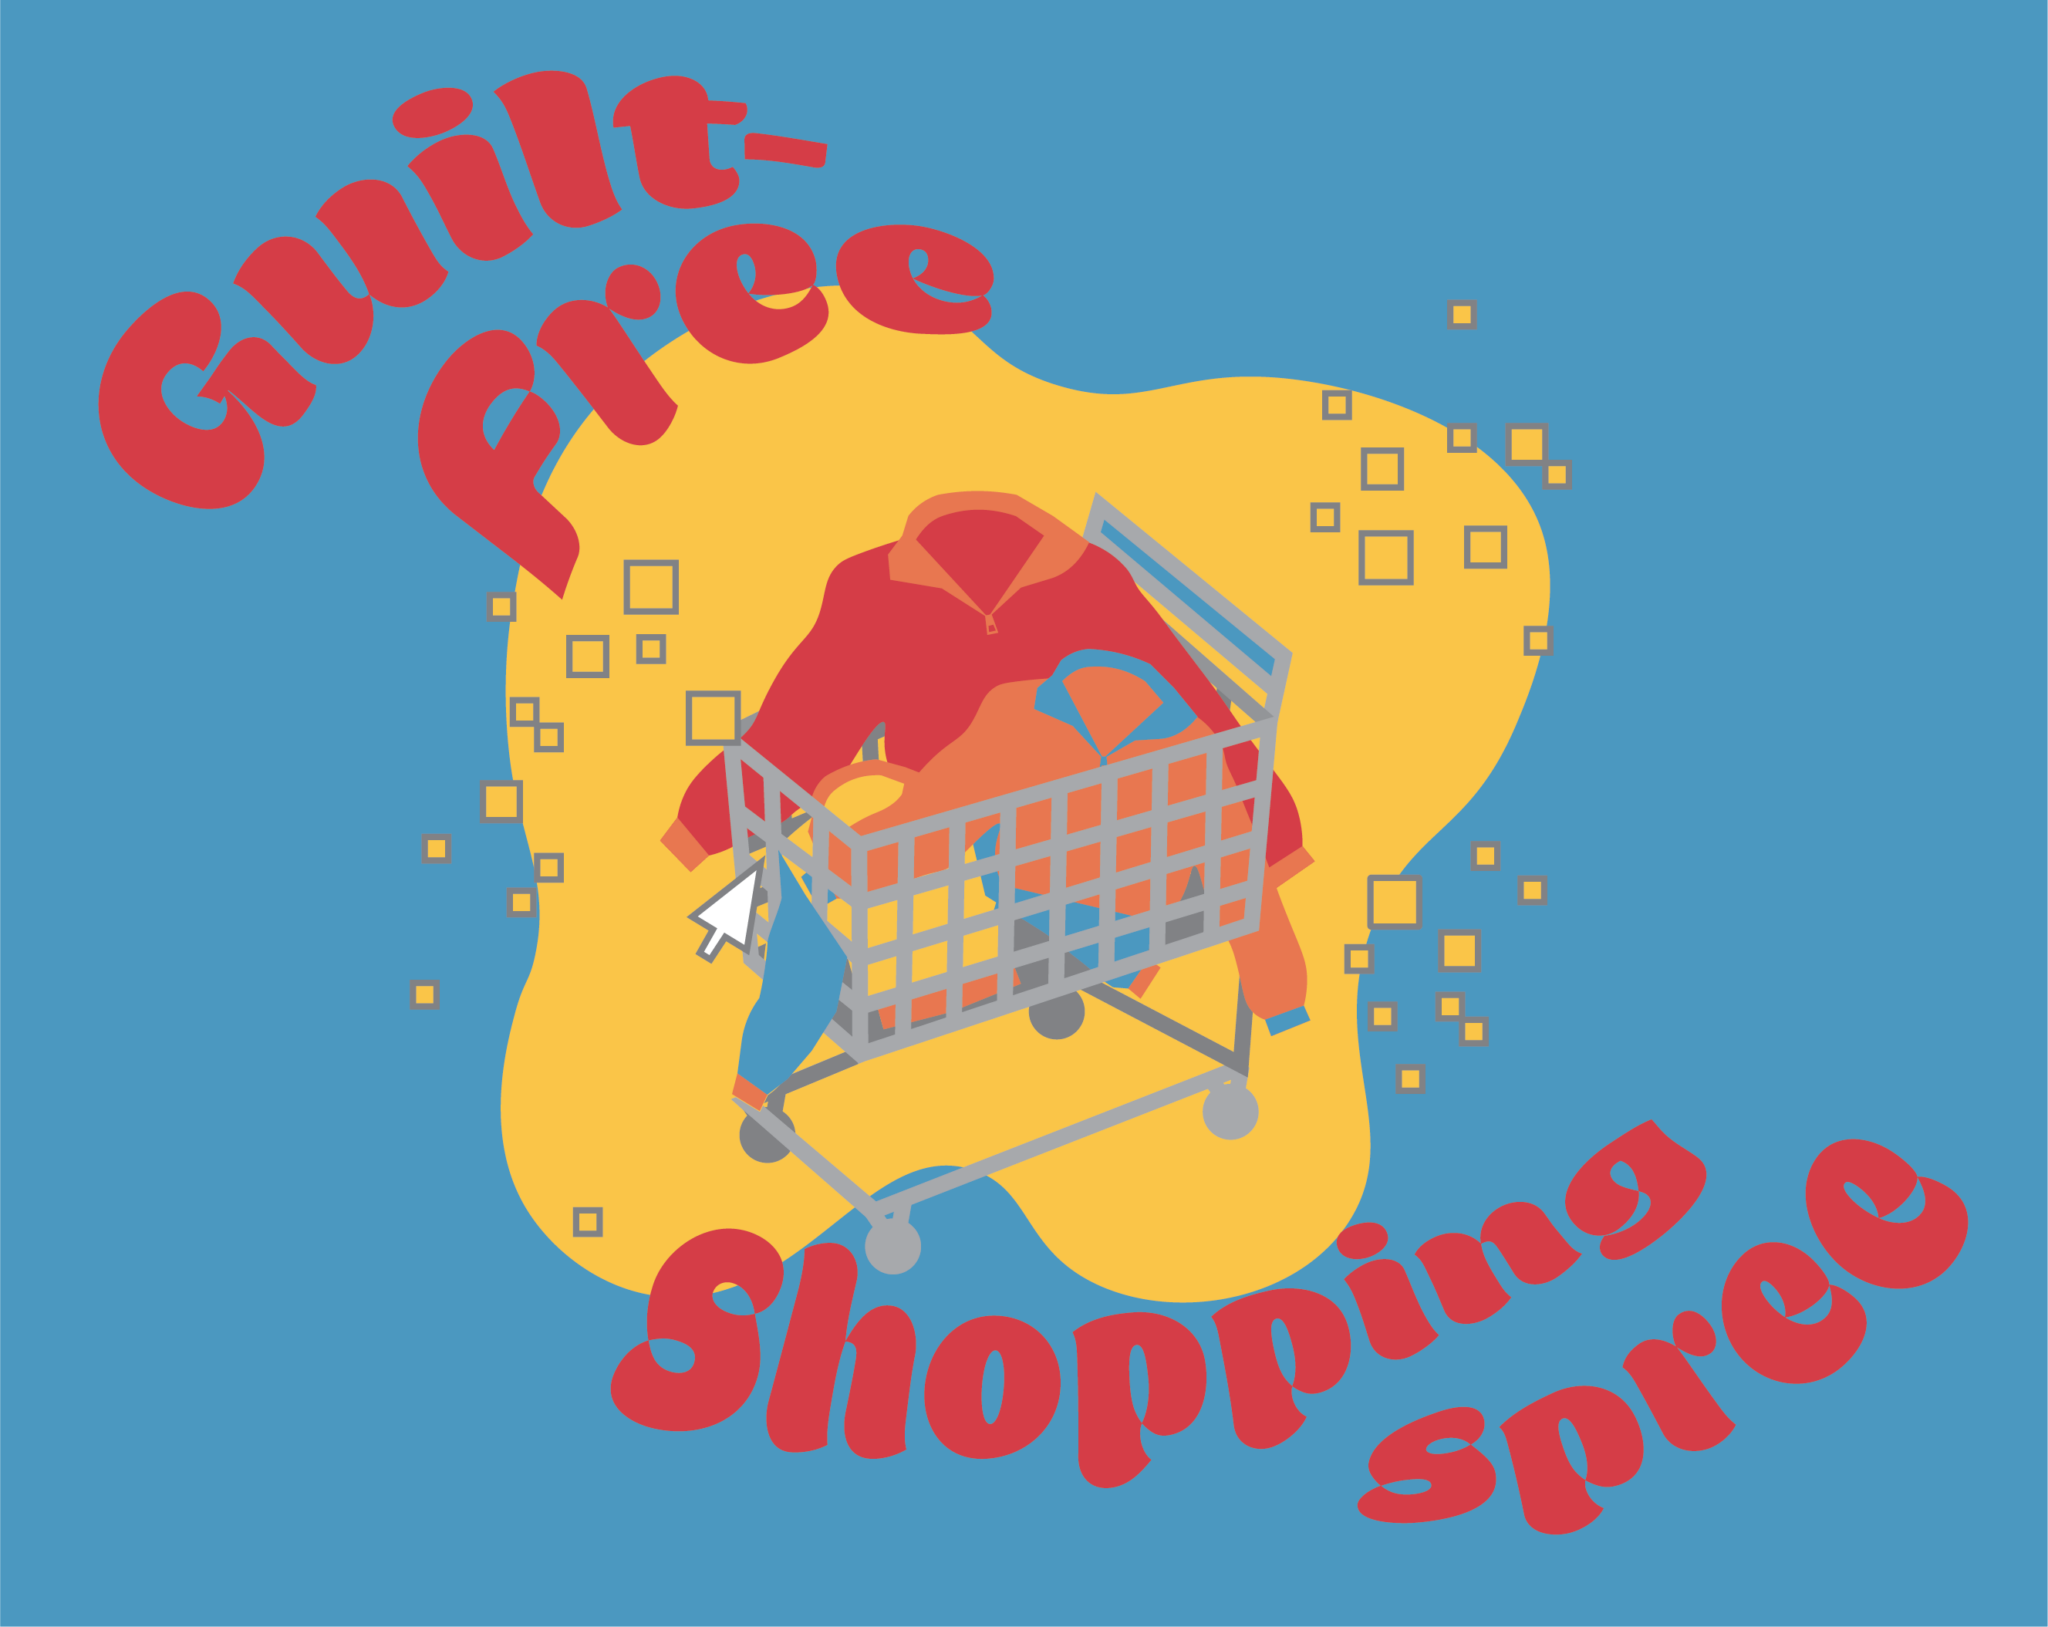 Illustration of a shopping cart with two sweaters. Red text on a blue background reads “Guilt-Free Shopping Spree”